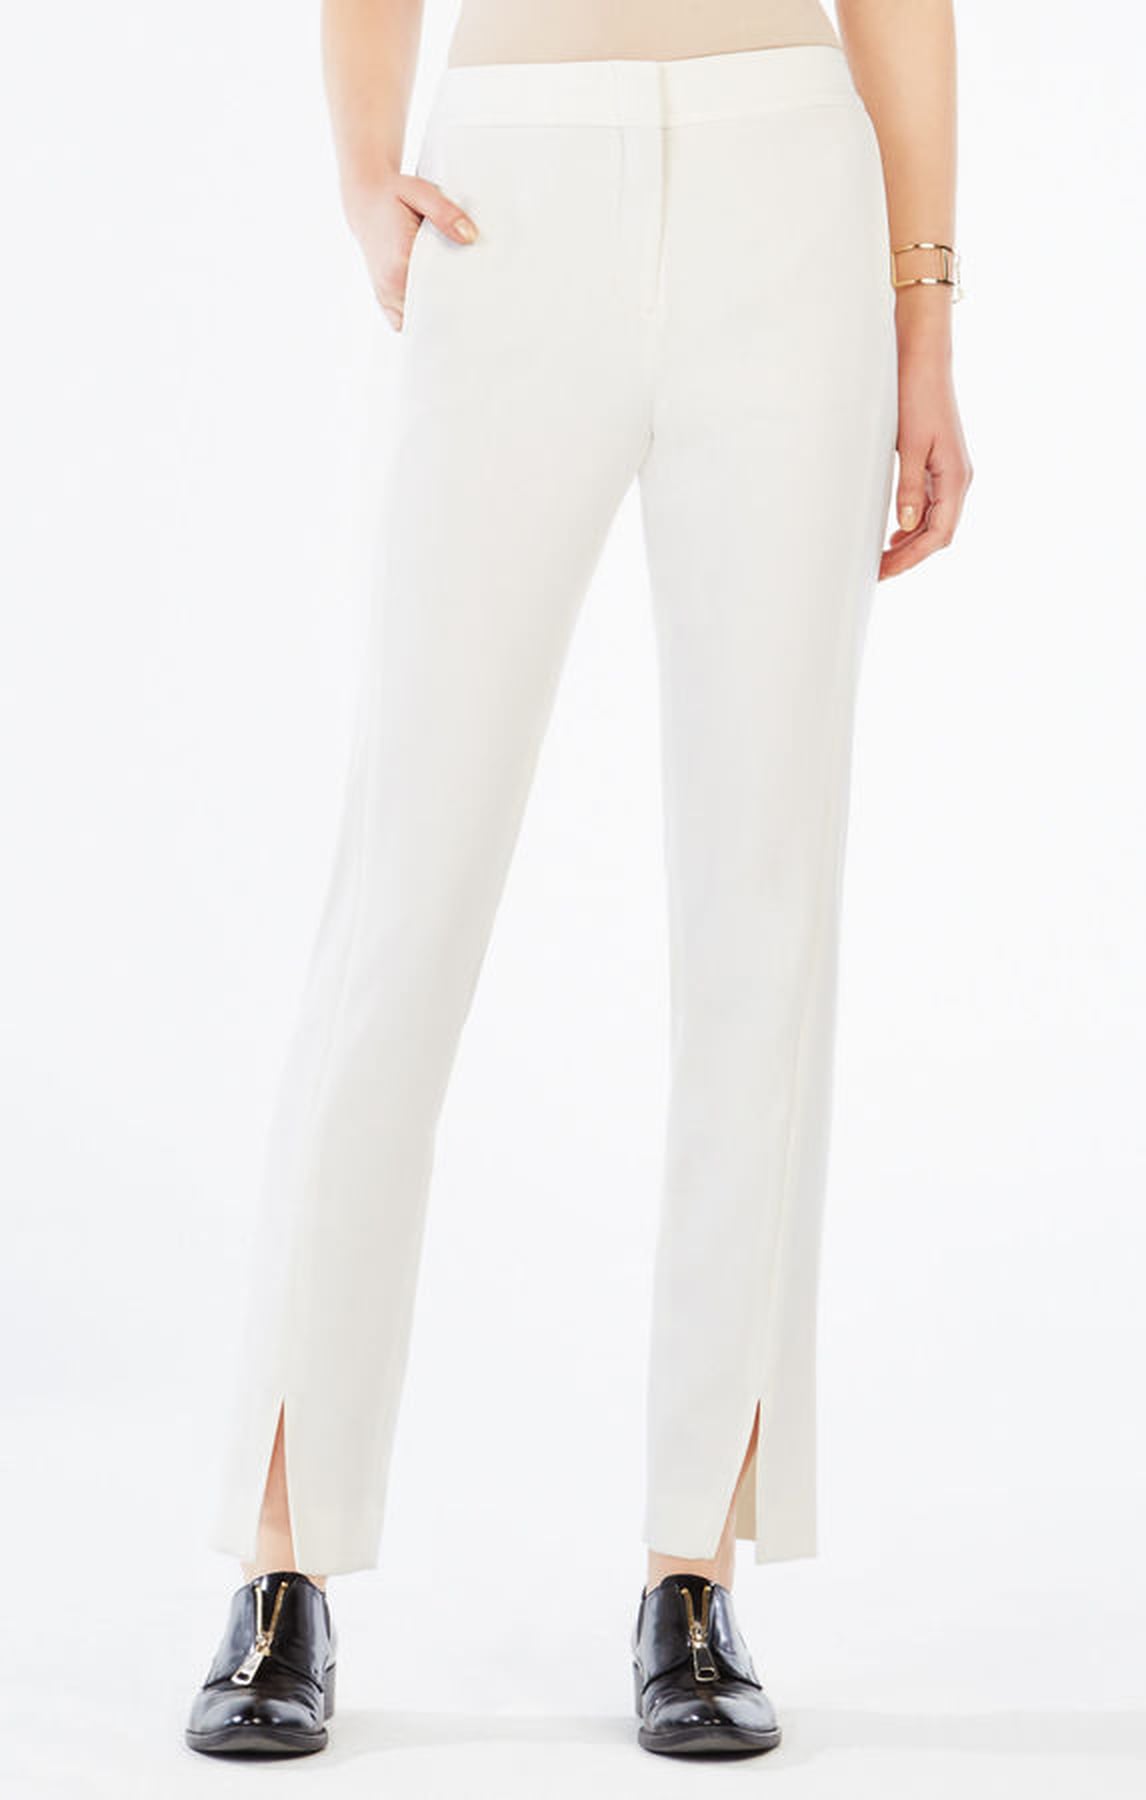 Slit Trousers For Spring and Summer | POPSUGAR Fashion